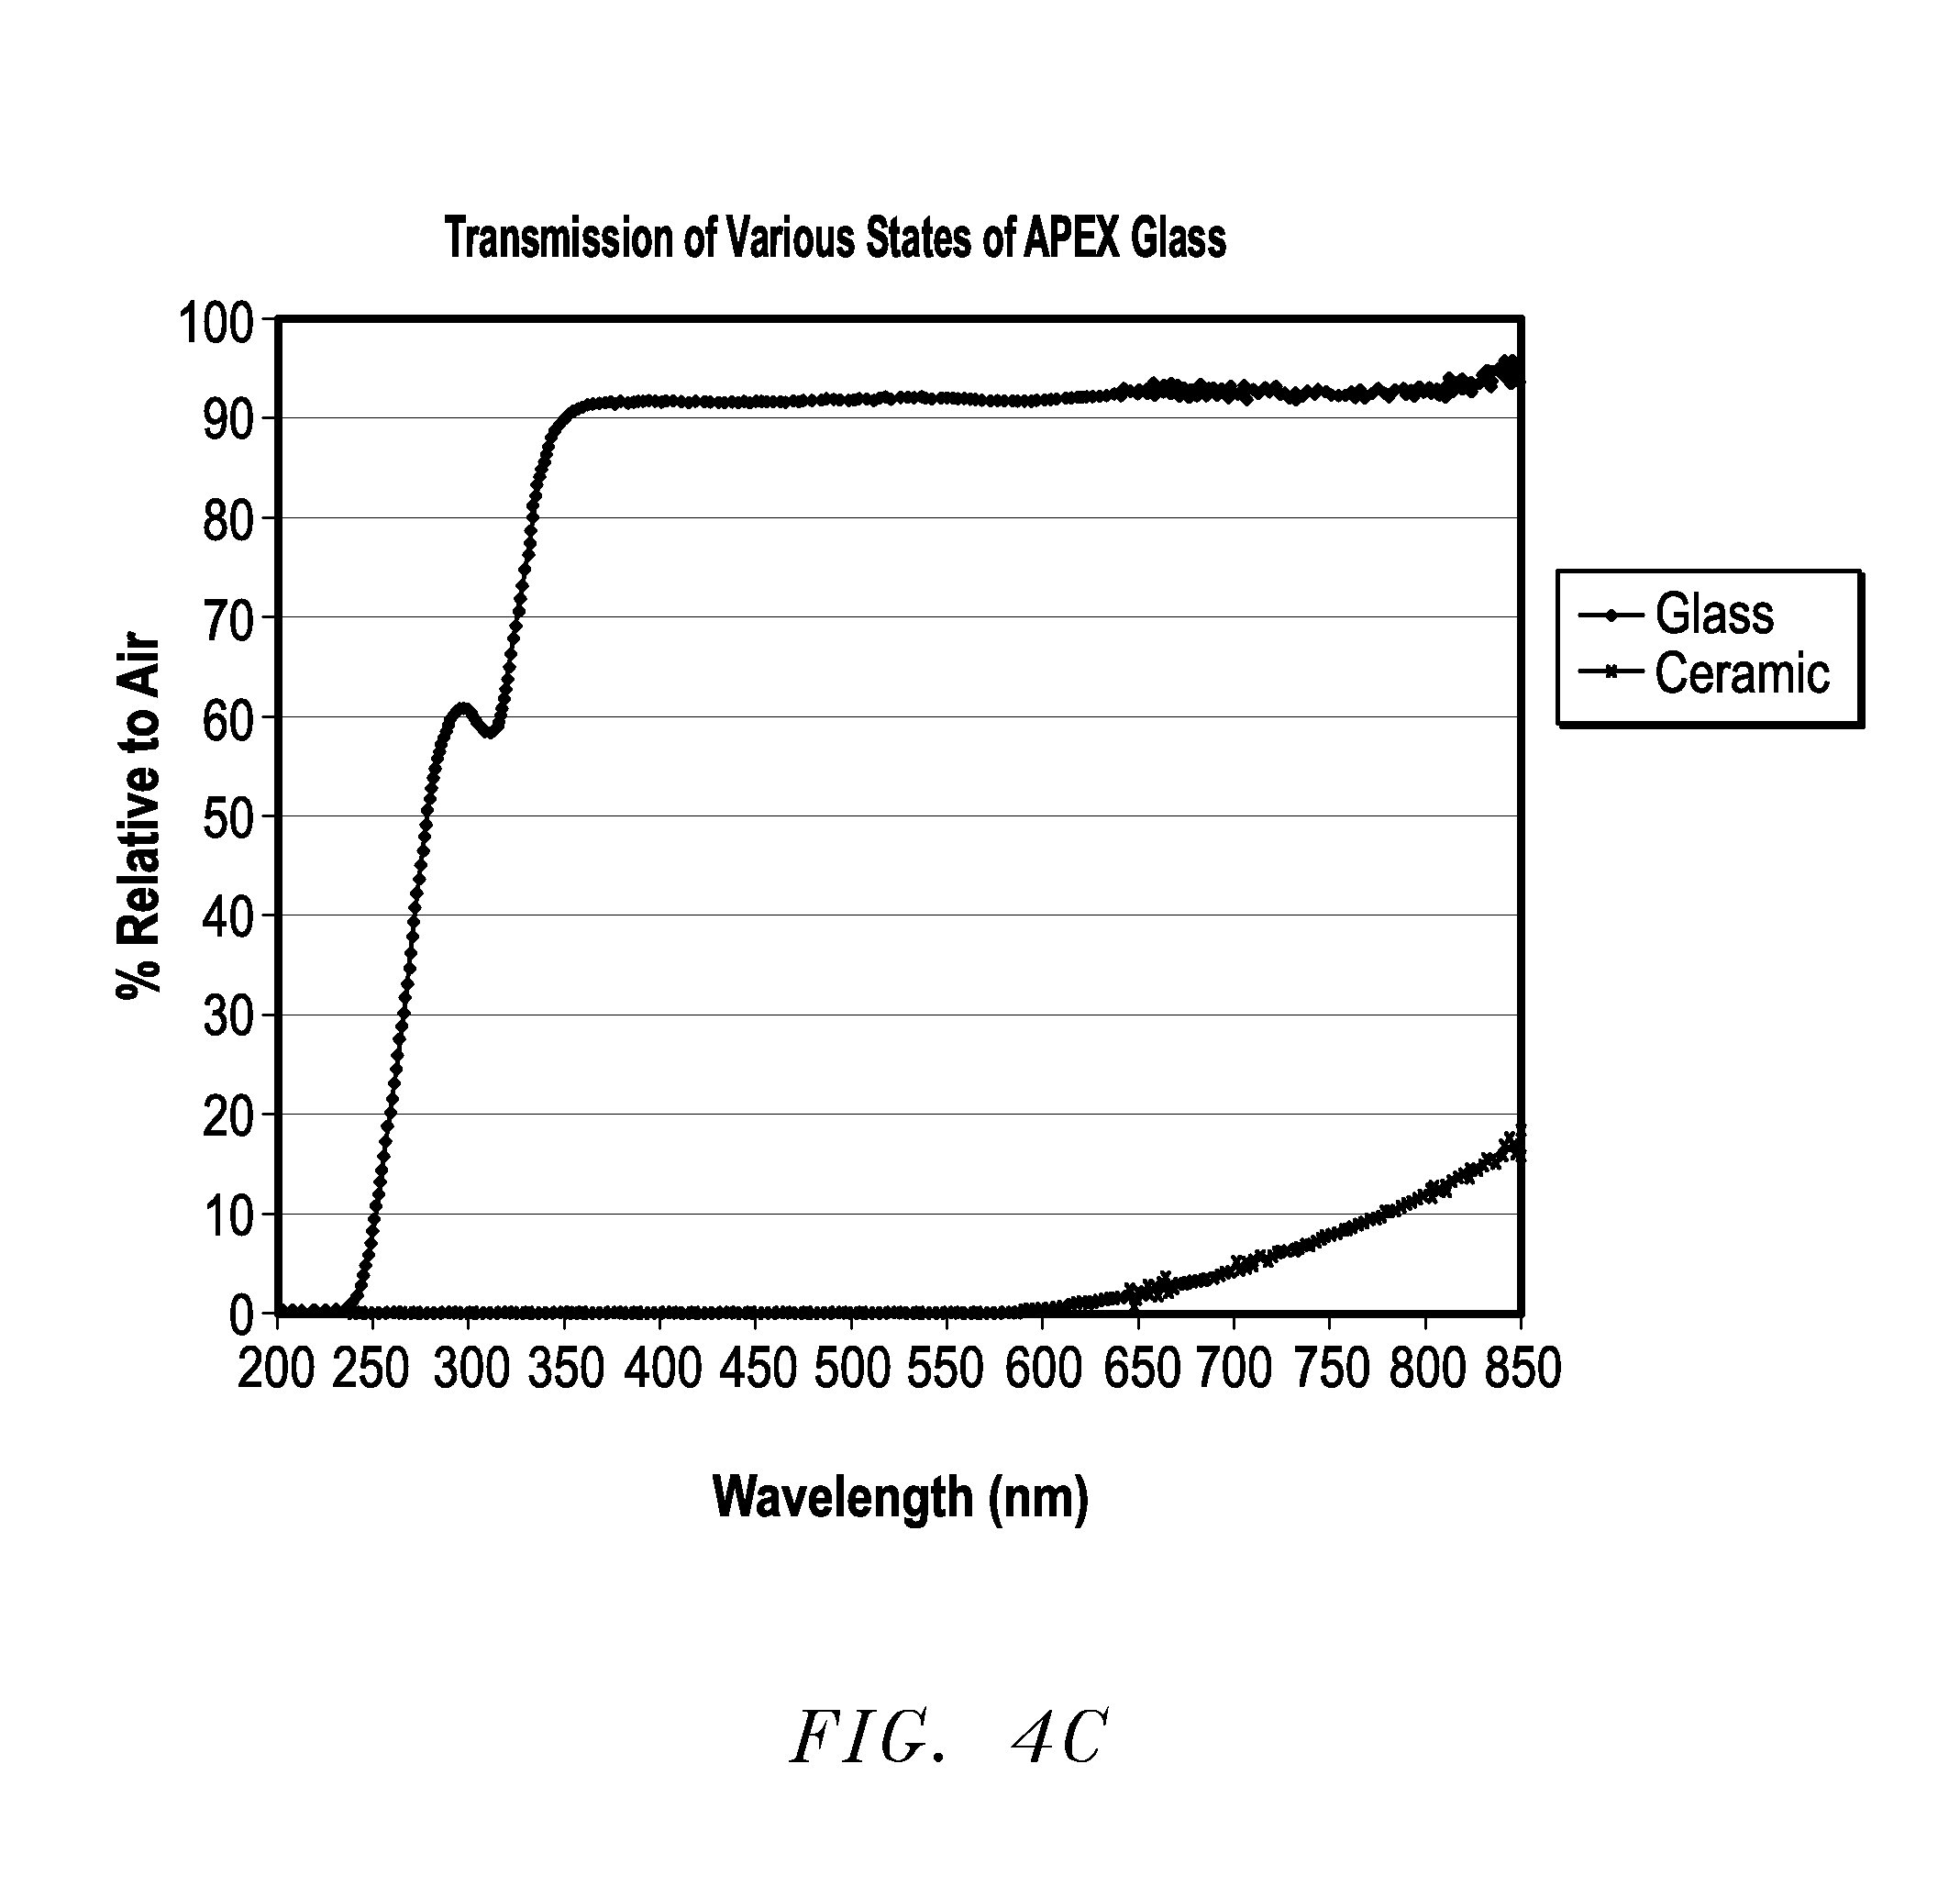 Methods of Fabricating Photoactive Substrates for Micro-lenses and Arrays